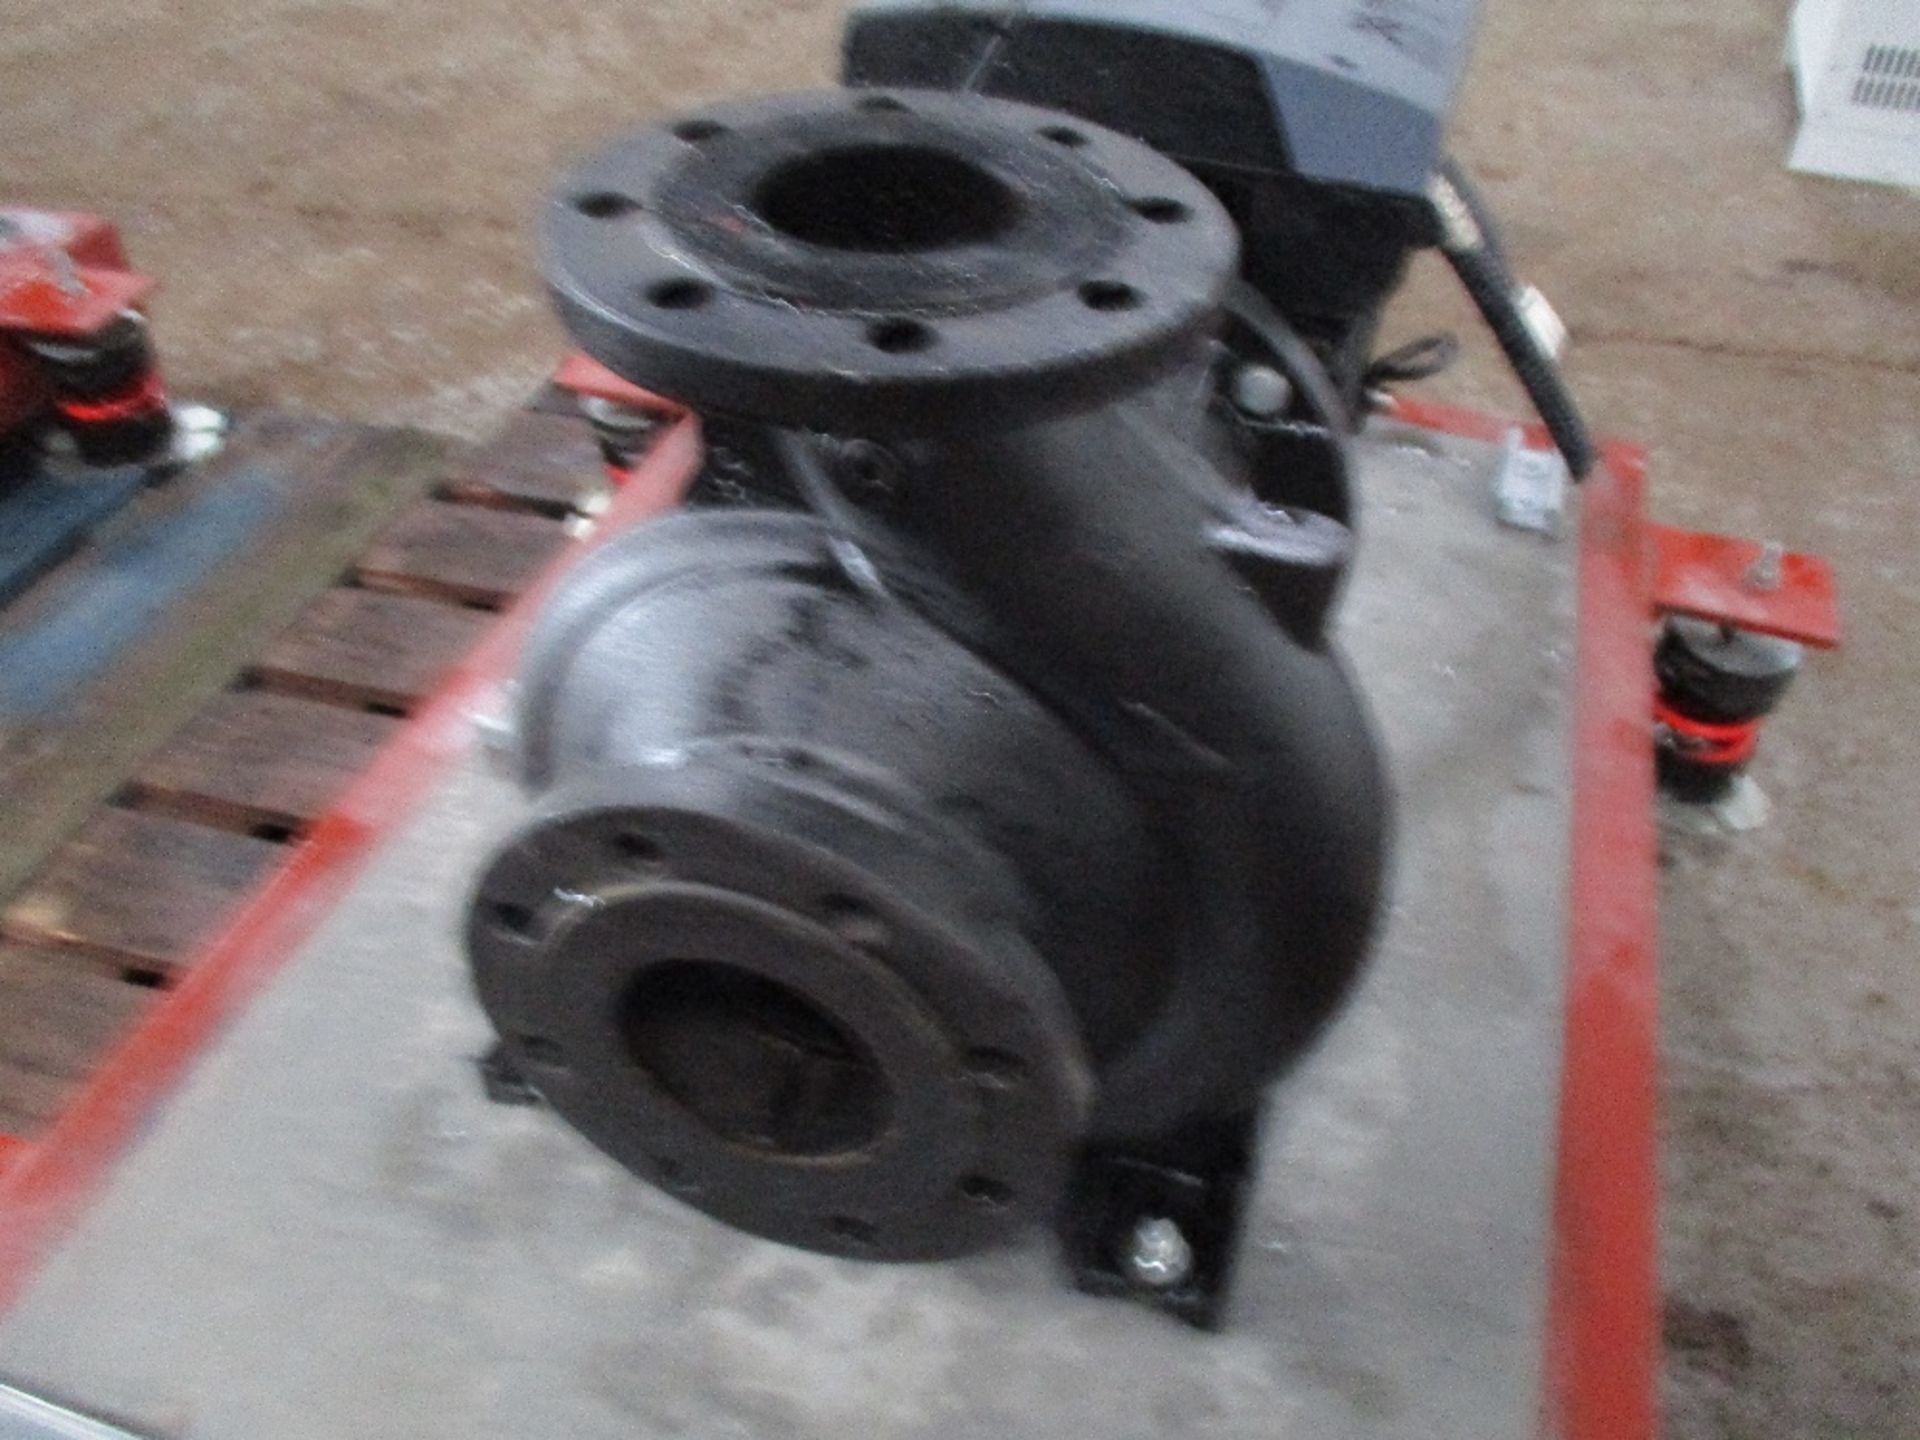 Grundfos NBE80-200 high output static 3 phase pump - Image 5 of 7